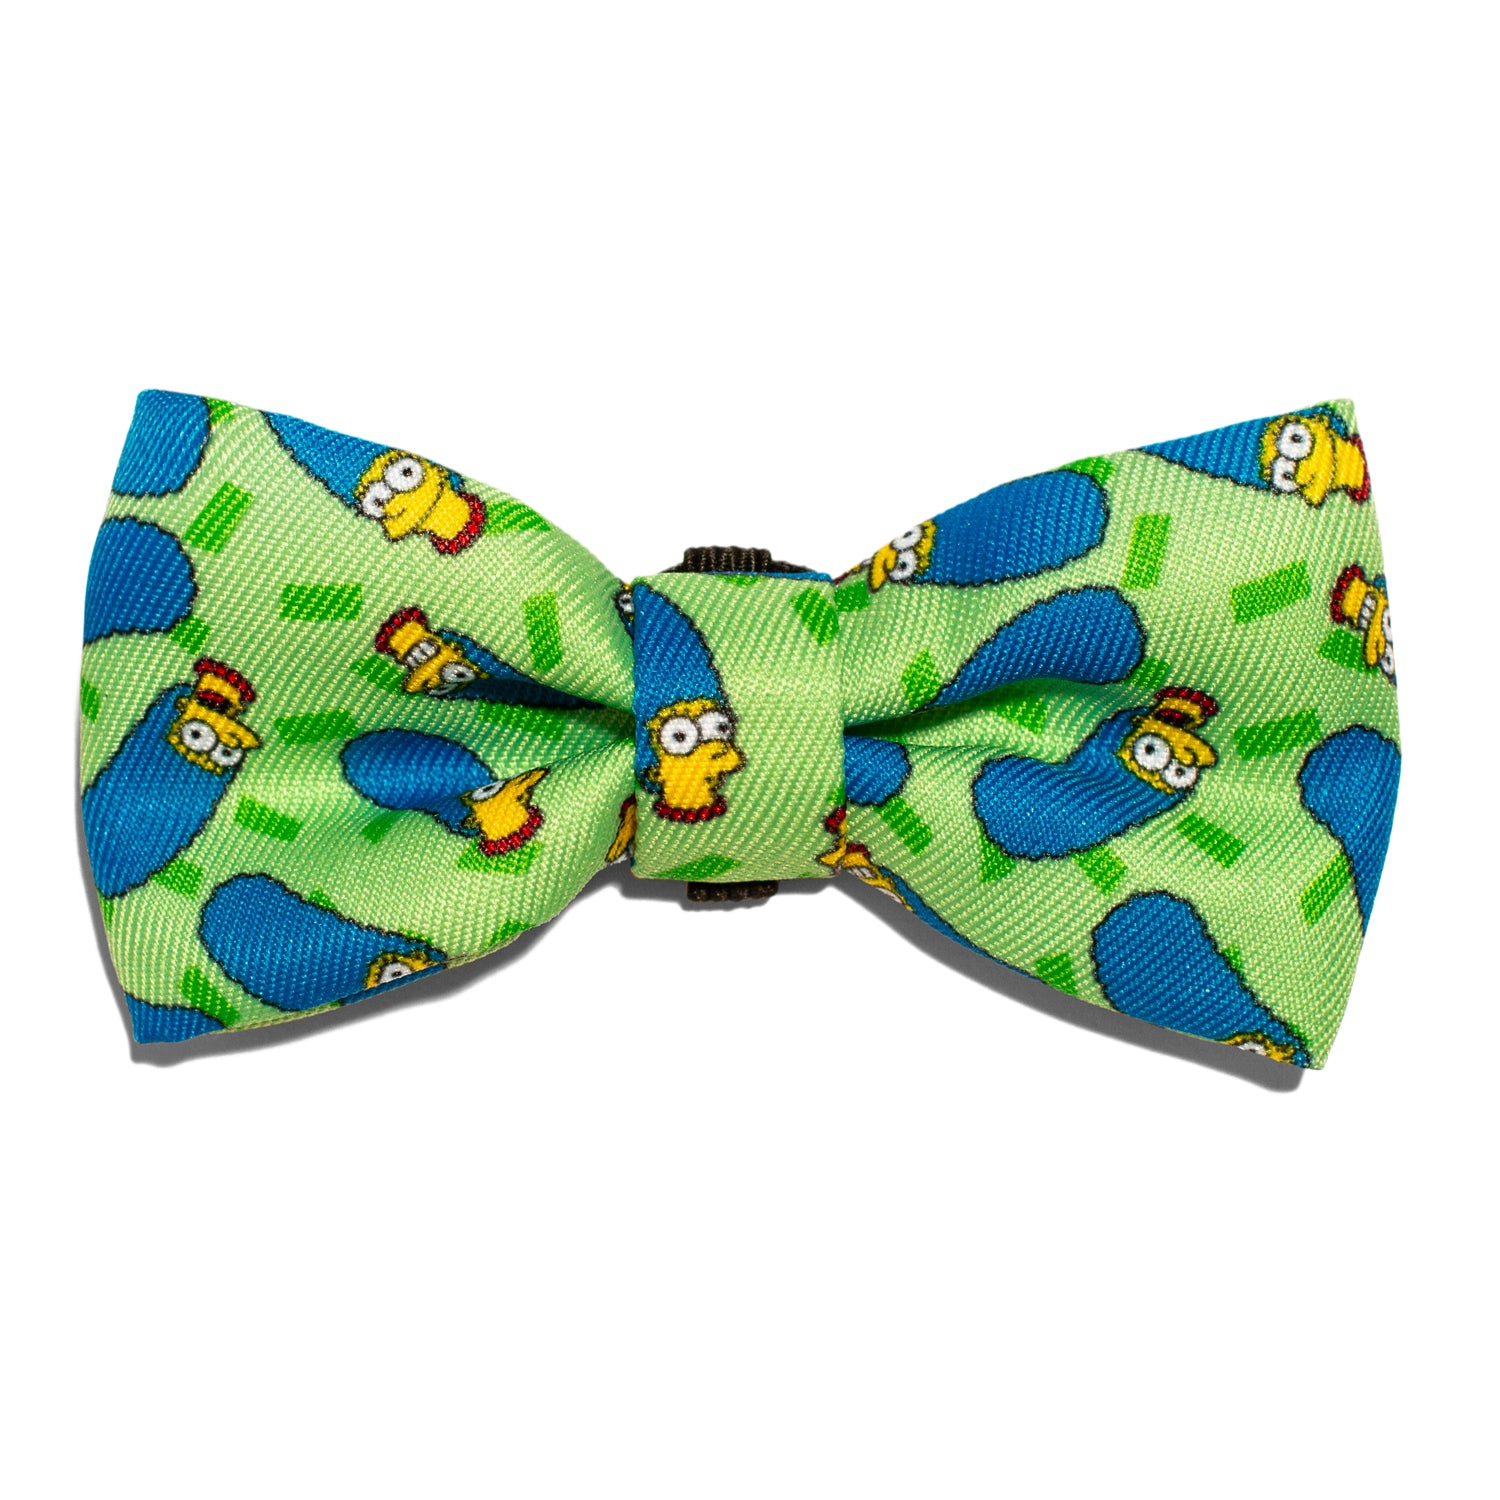 zee.dog bow tie marge simpson